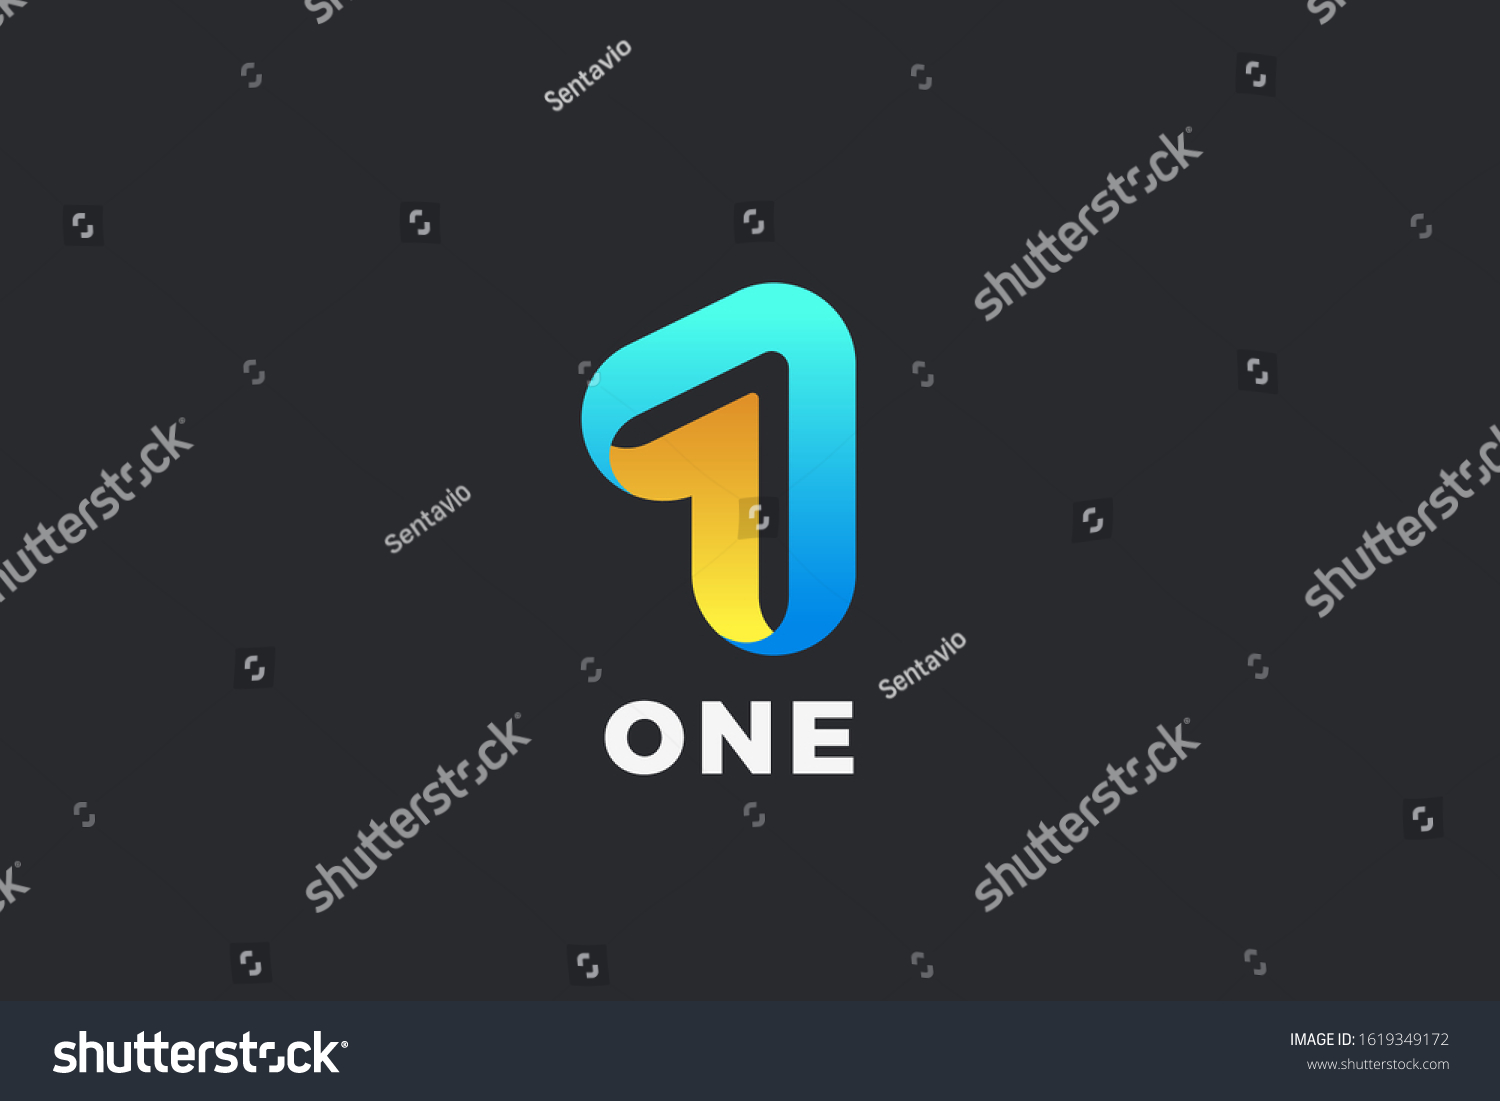 Number 1 One Logo Design Vector Stock Vector (Royalty Free) 1619349172 ...